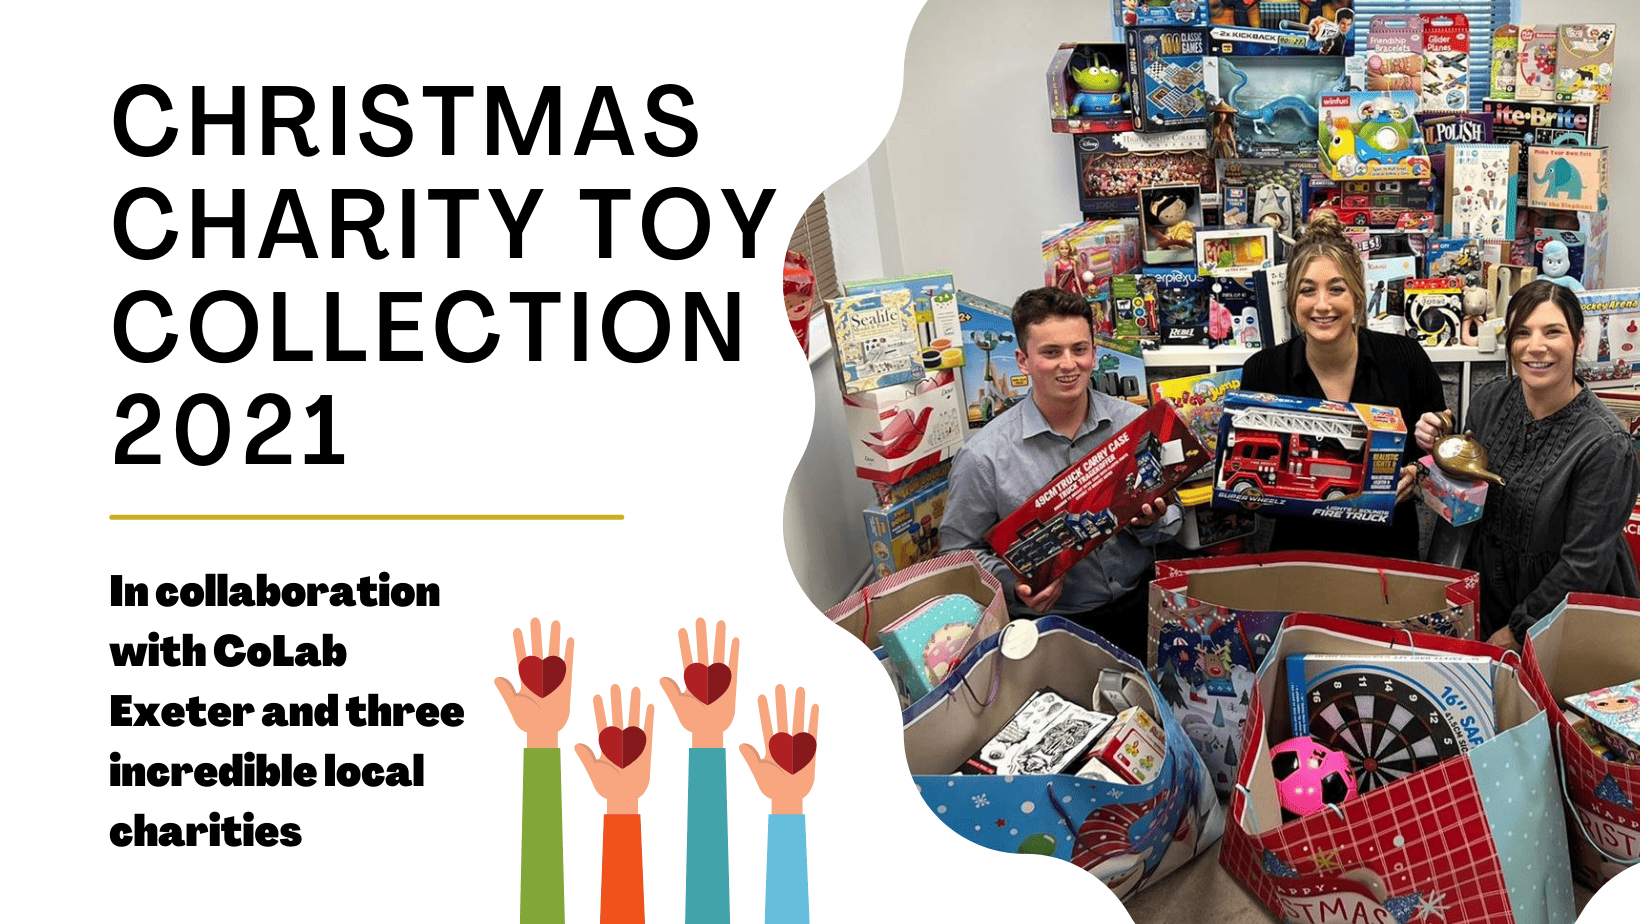 2021 Christmas charity toy collection